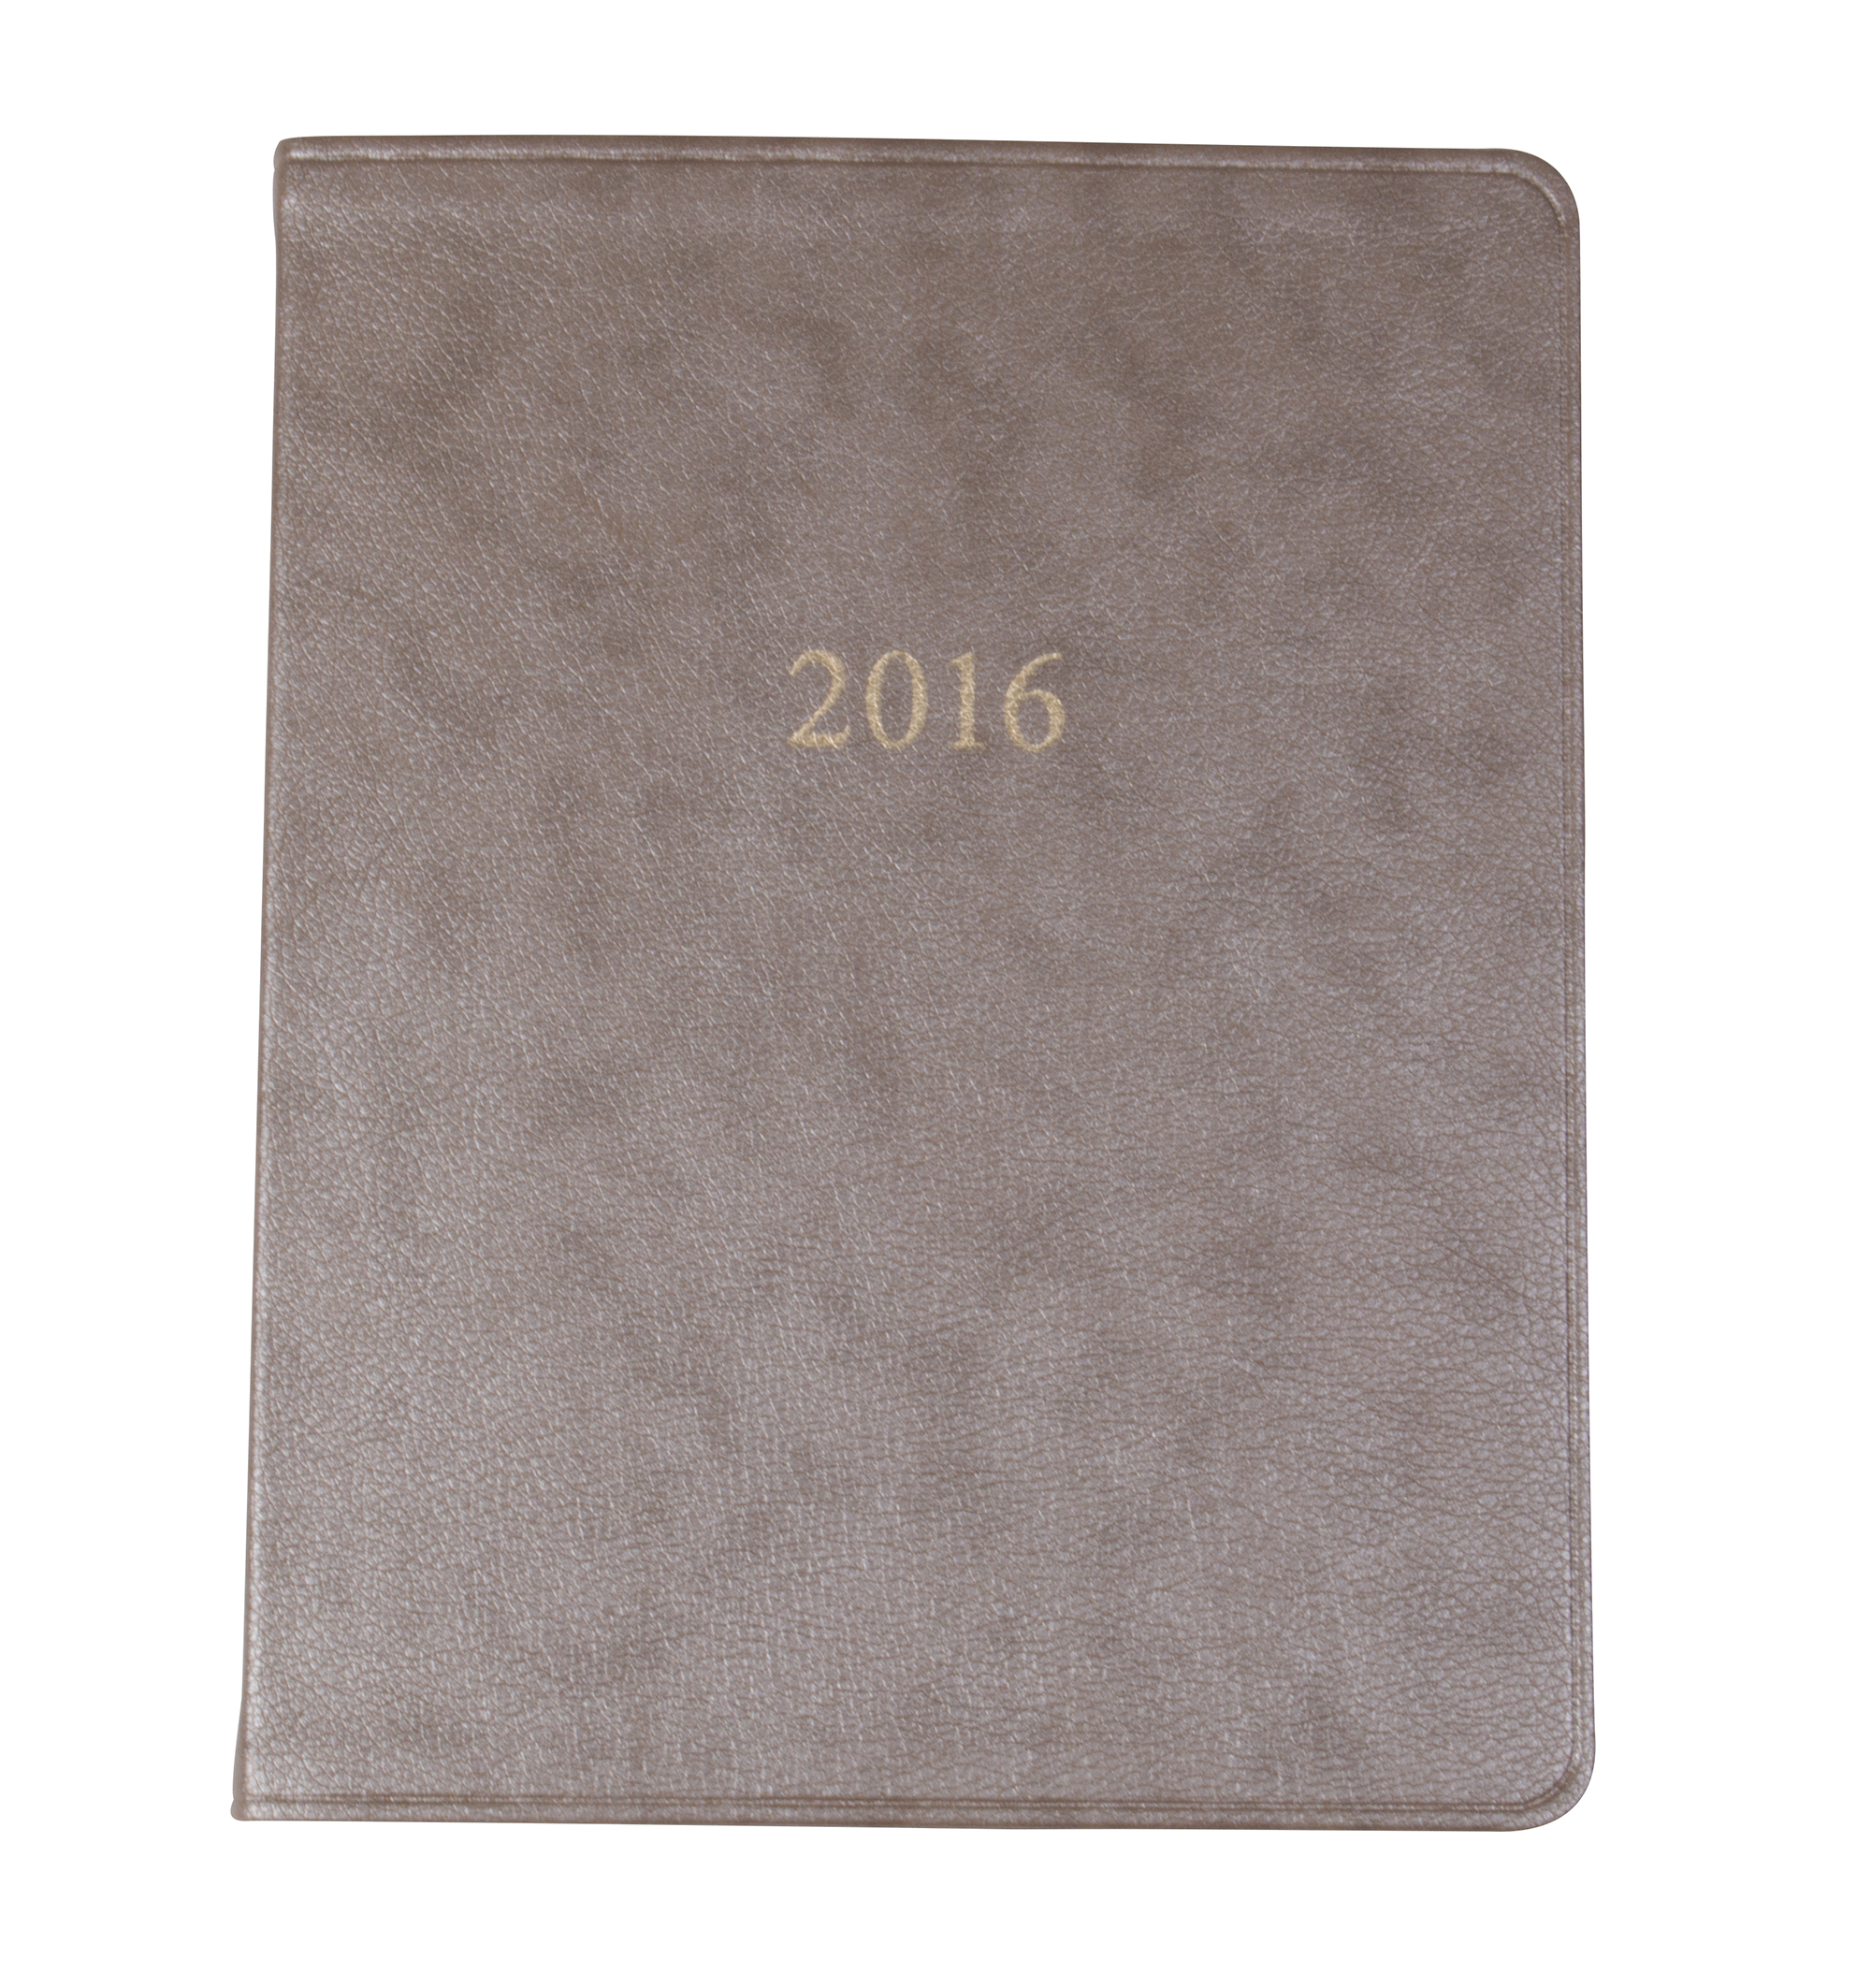 Gallery Leather ”Key West Large Monthly Planner” in ”Pearl Taupe,” $20 at Barnes &amp; Noble Towne Centre